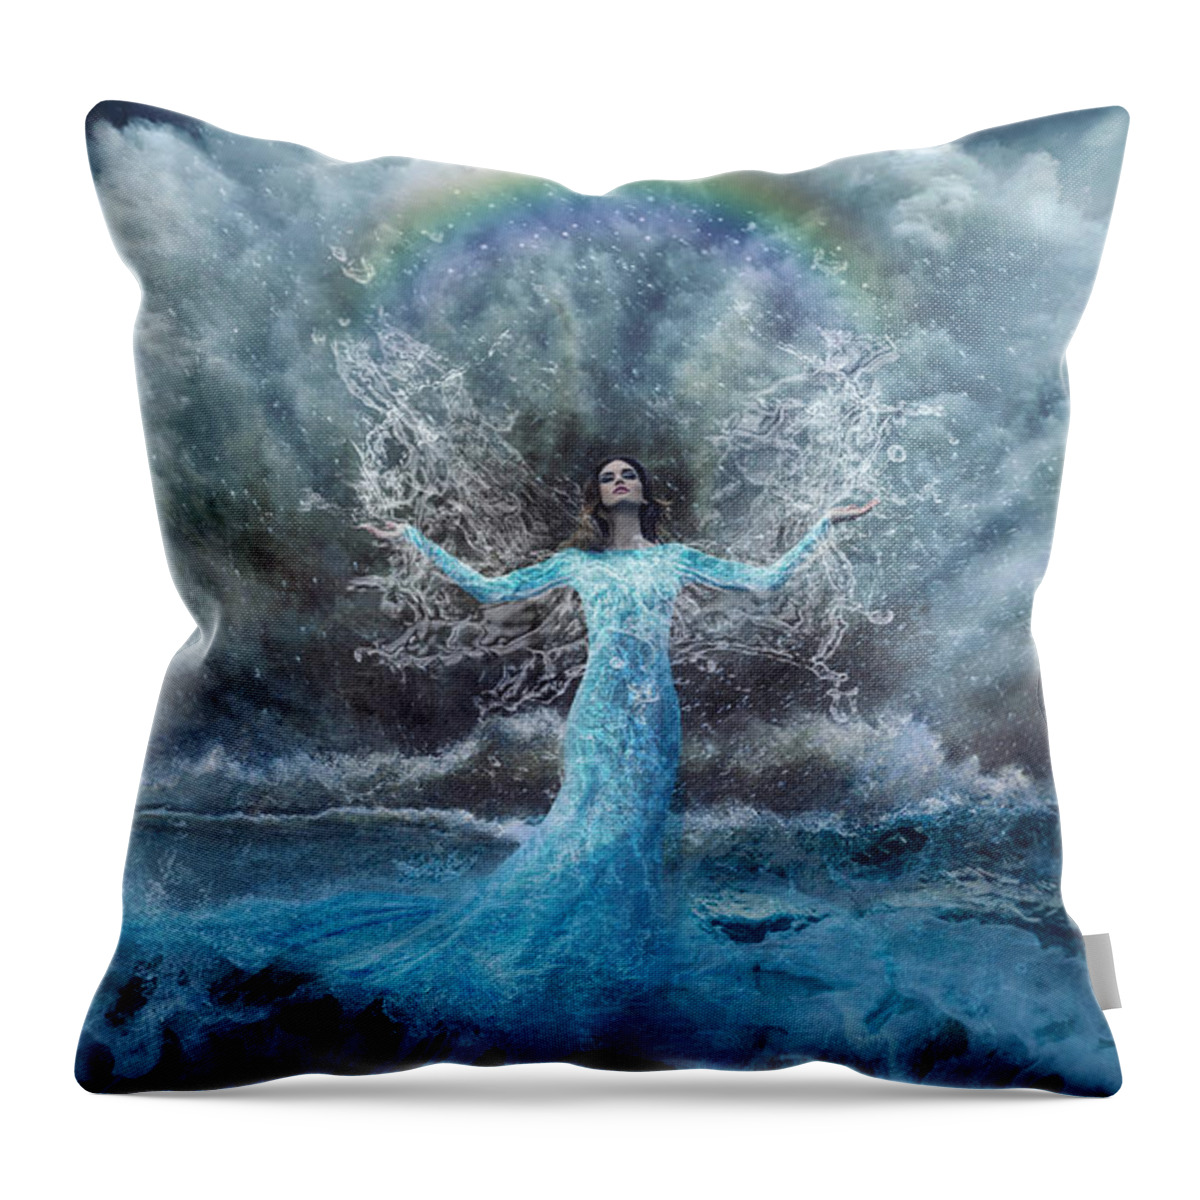 Nymph Of Water Throw Pillow featuring the digital art Nymph of the Water by Lilia D